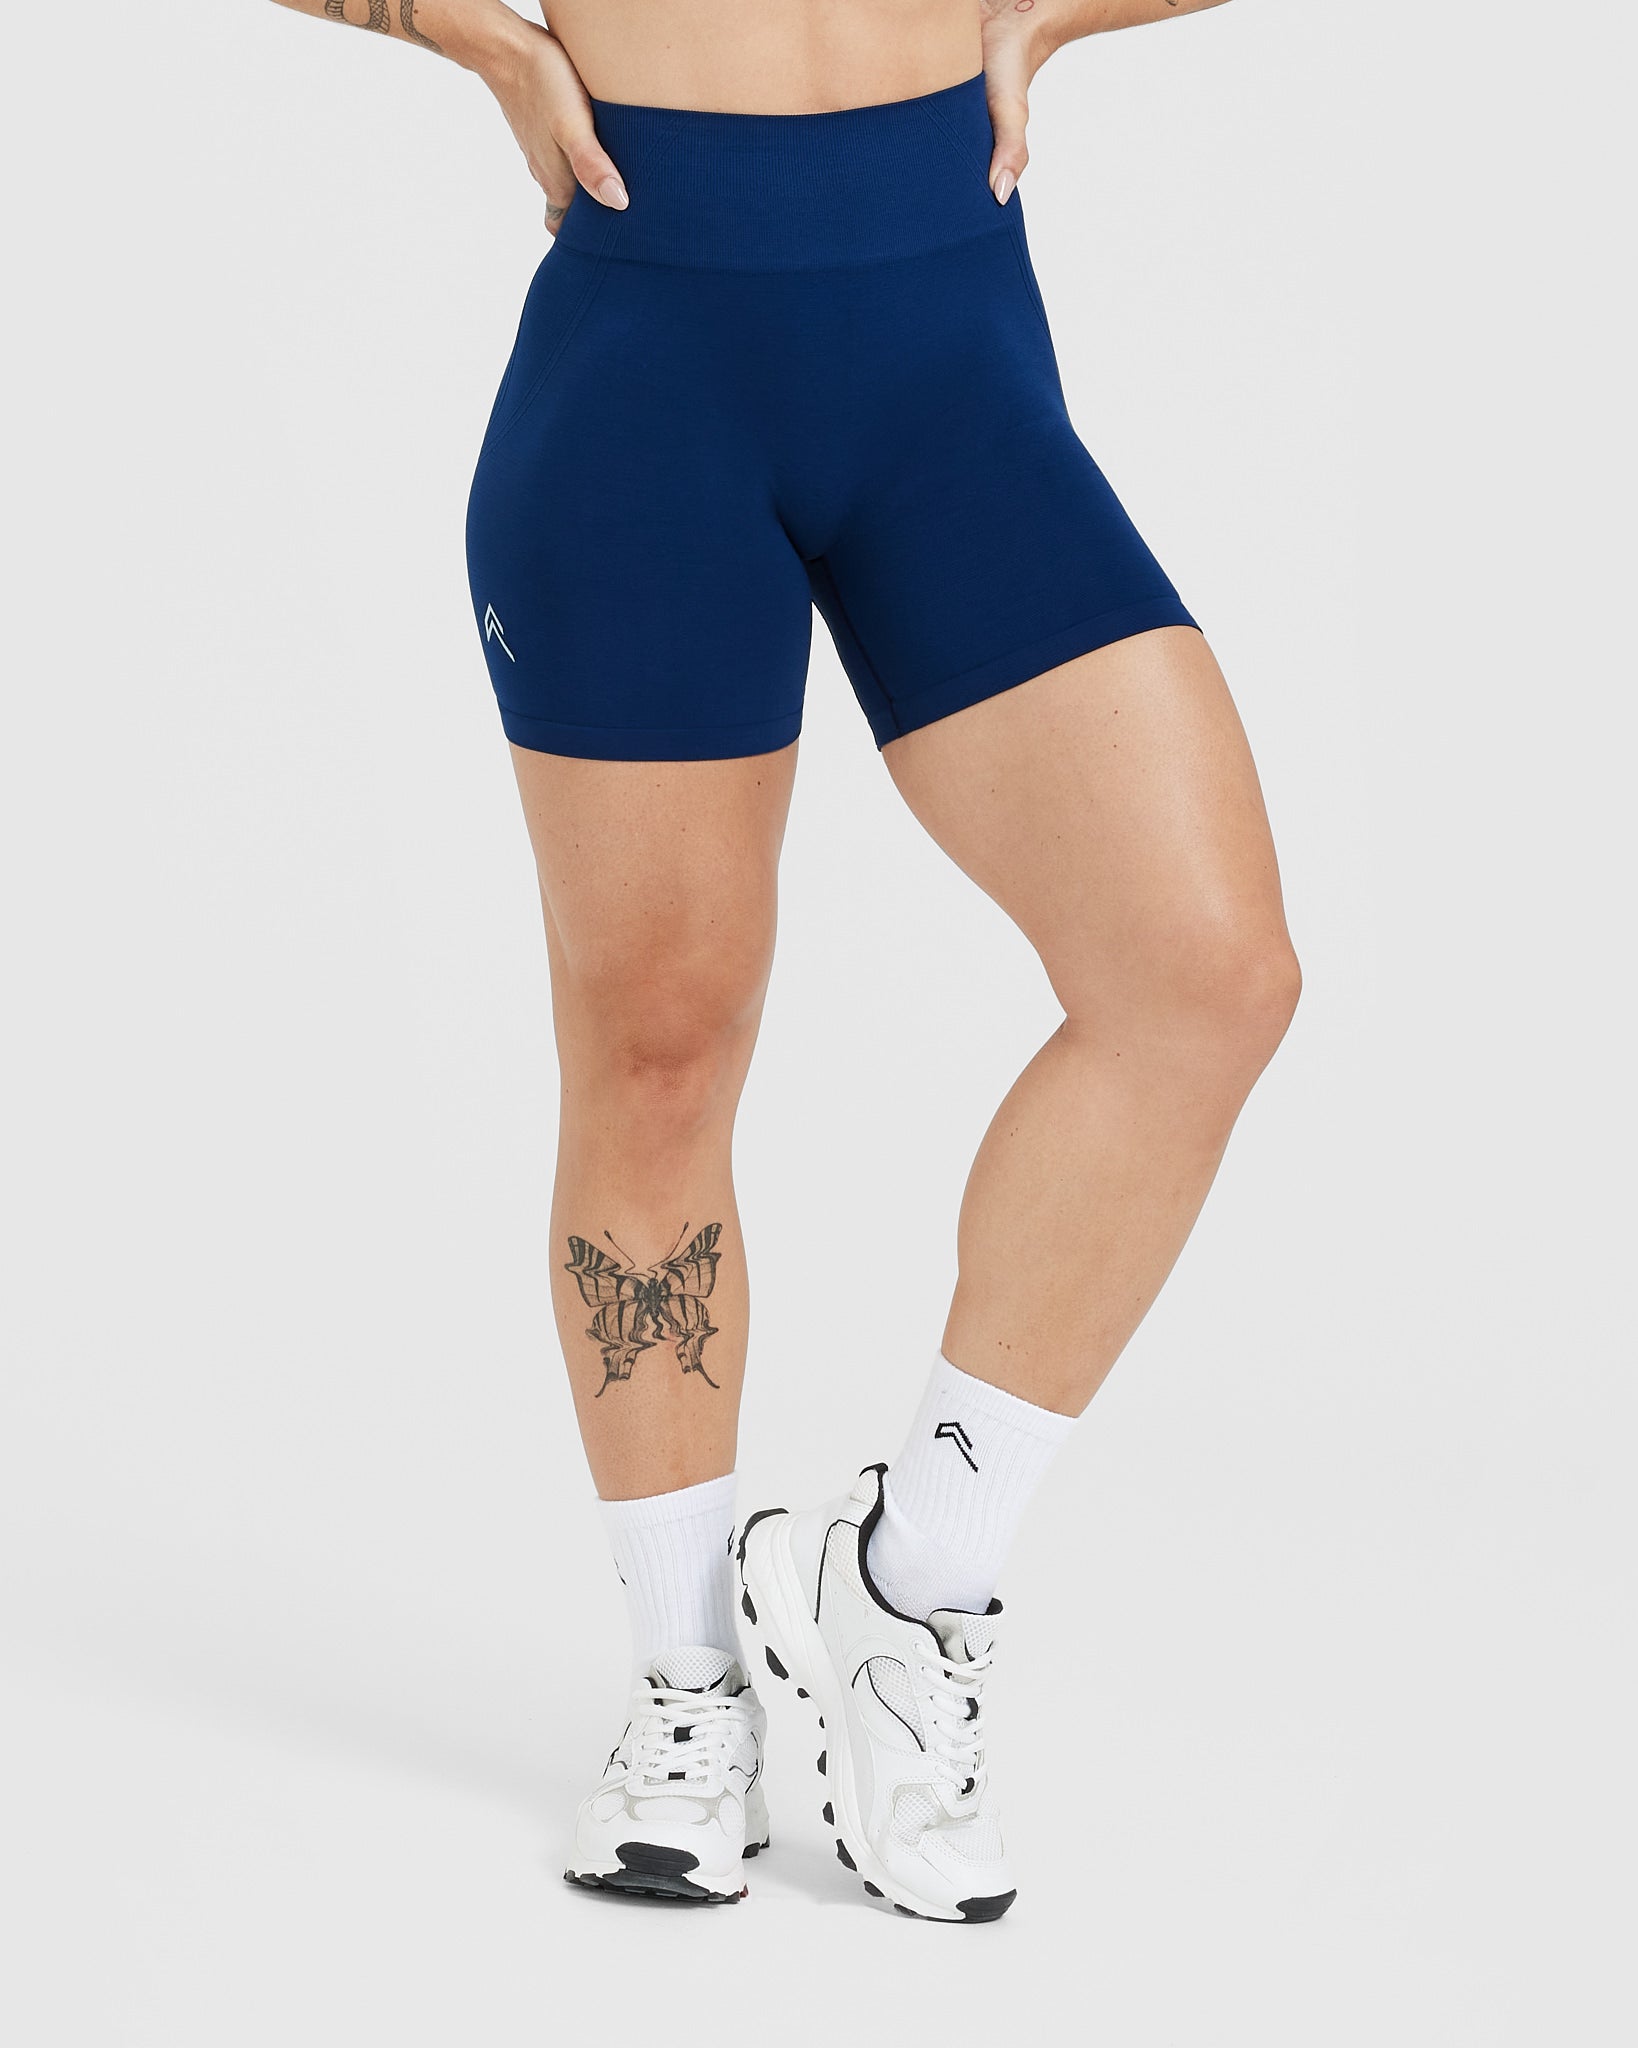 BLUE HIGH WAISTED SHORTS - WOMEN - MIDNIGHT | Oner Active US